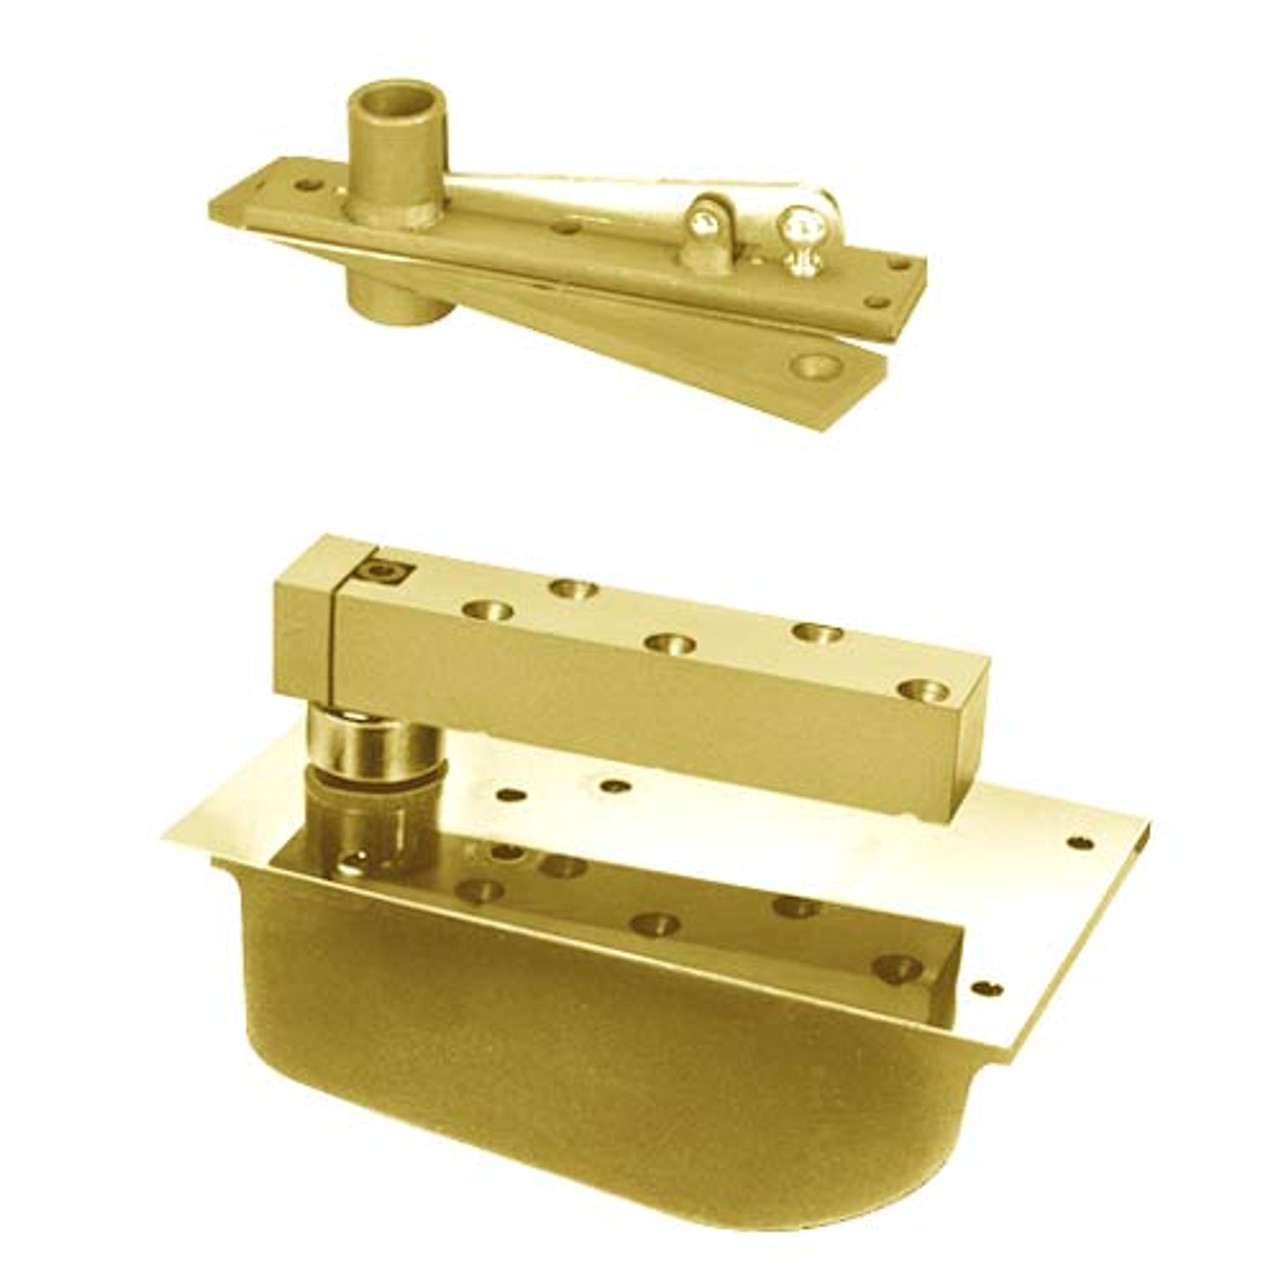 H28-90S-CWF-LH-606 Rixson 28 Series Heavy Duty Single Acting Center Hung Floor Closer in Satin Brass Finish